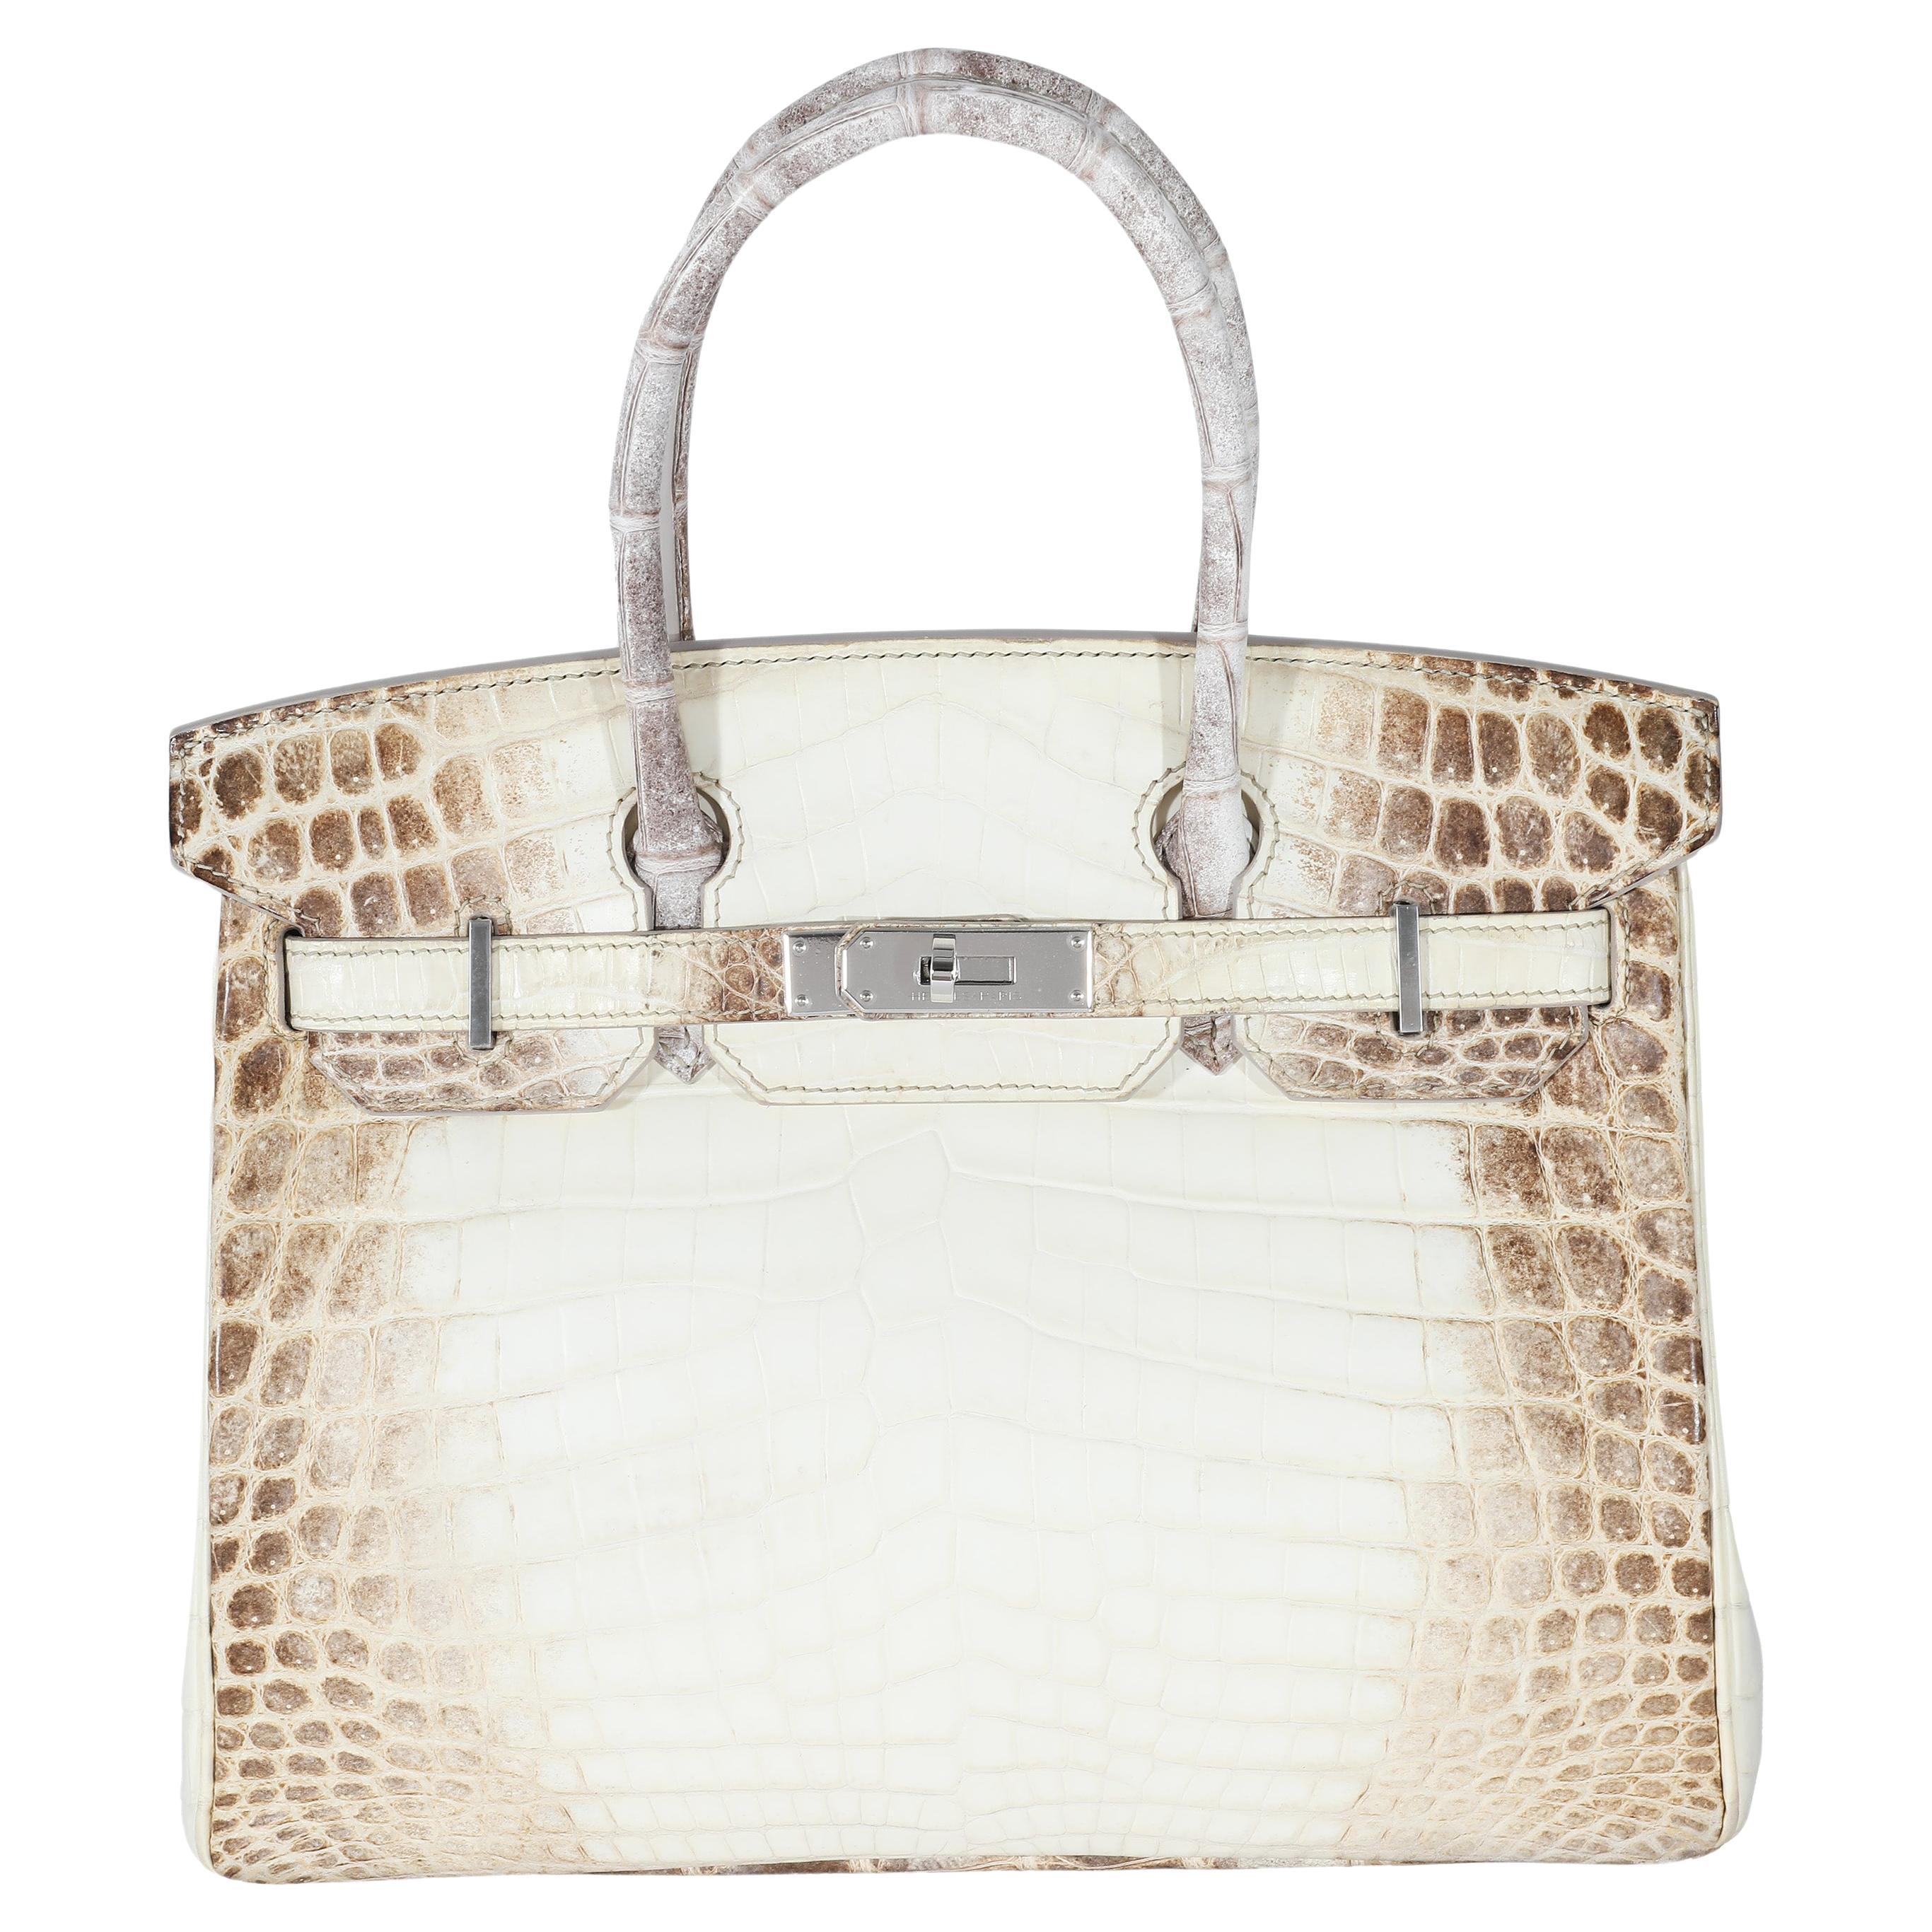 How much is the Hermes Himalayan Birkin?